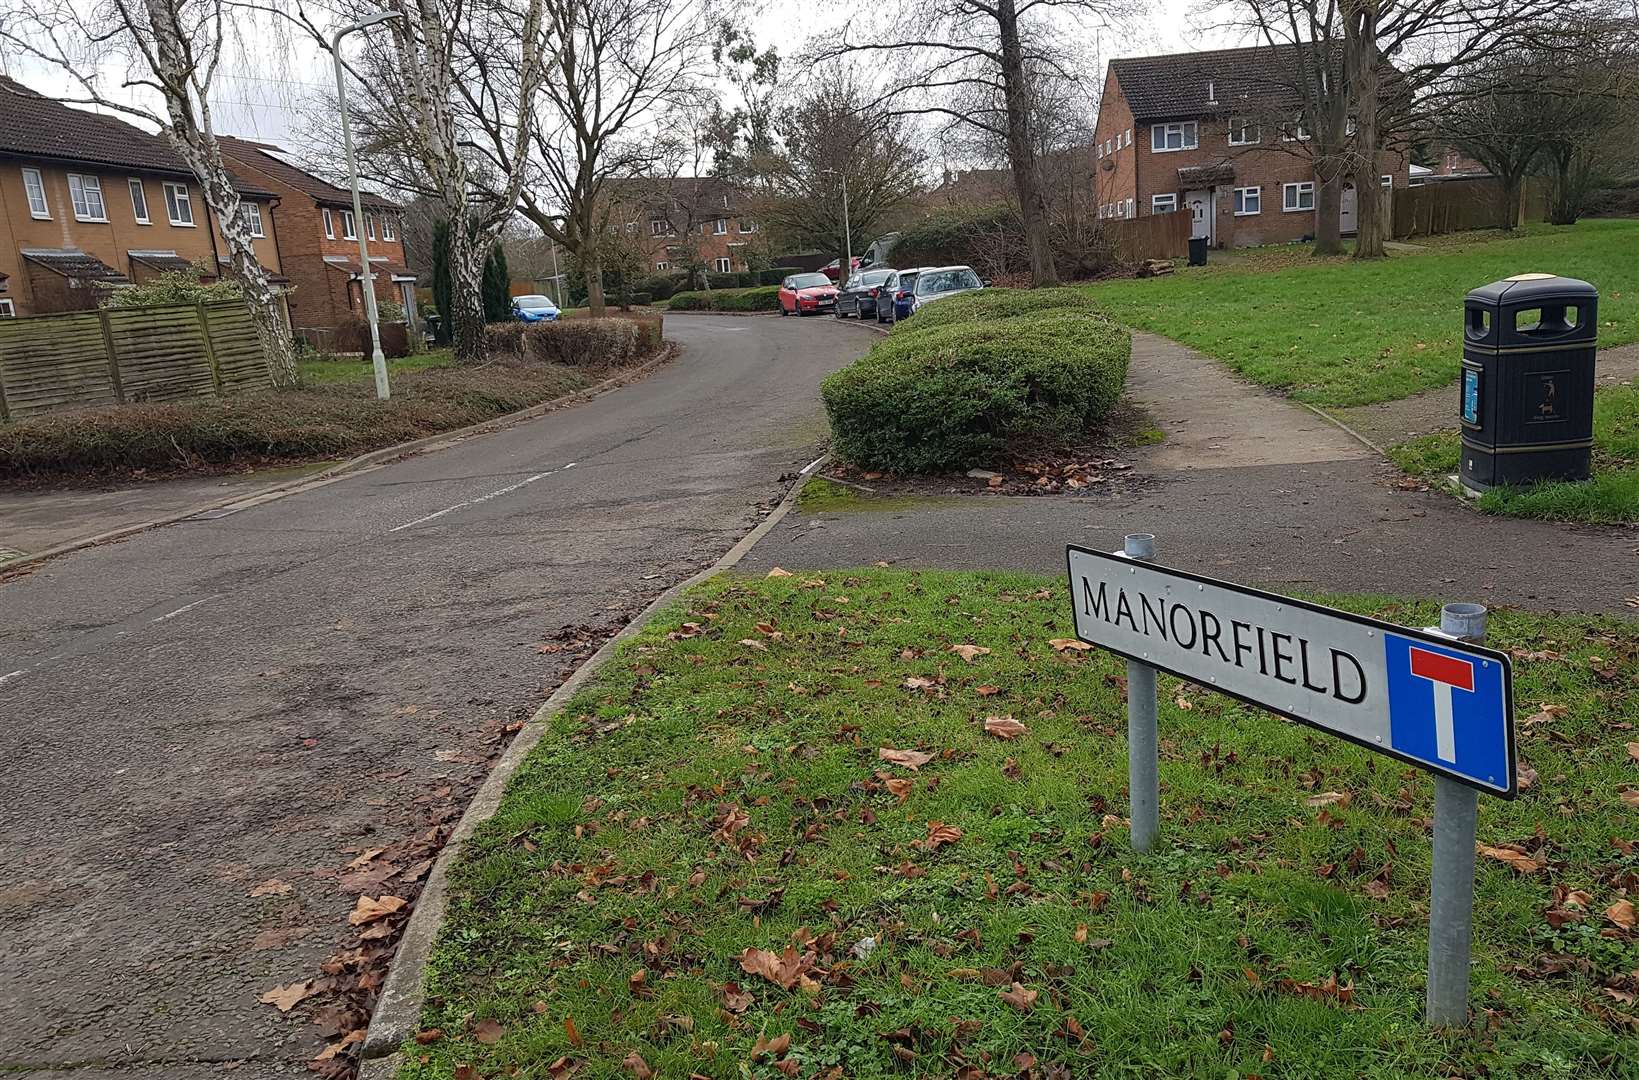 A dog has died after a kitchen fire in Manorfield, in Singleton